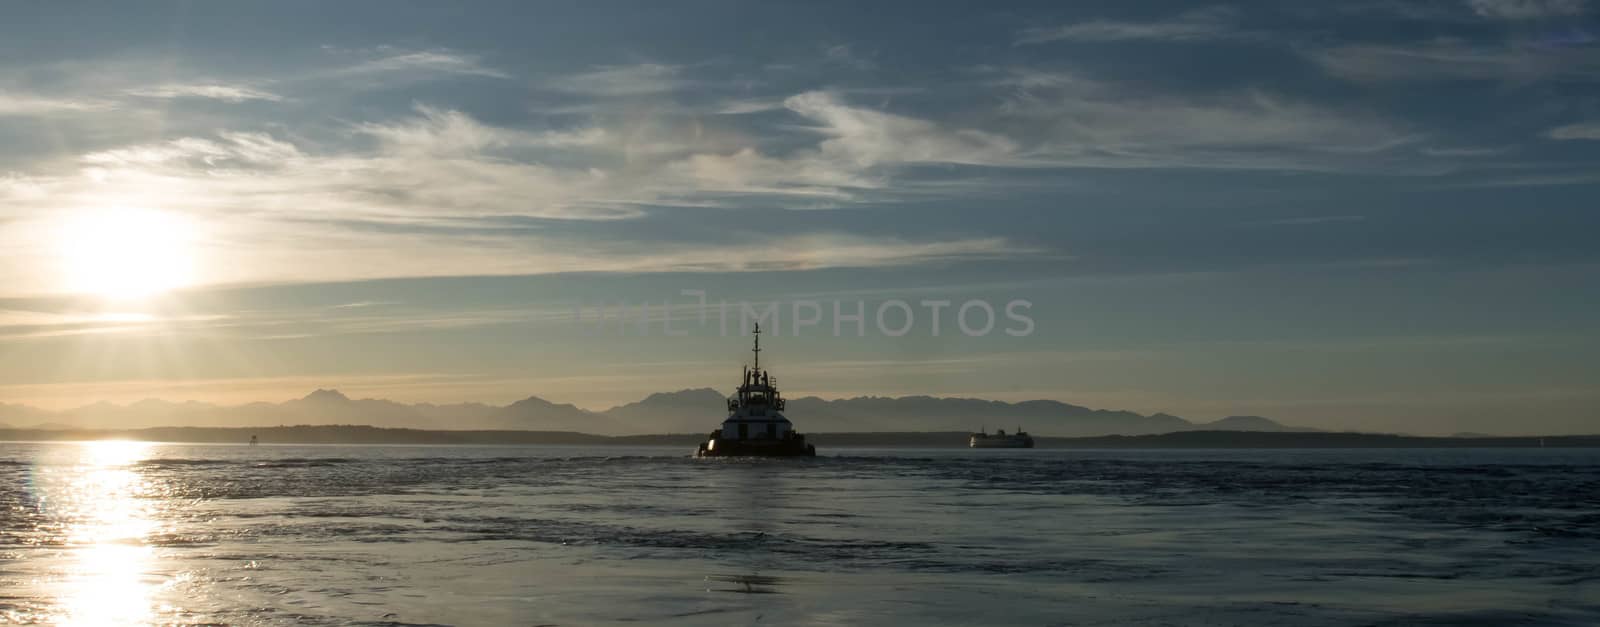 Late afternoon view across Puget Sound with Olympic Mountains, Washington State Ferry, and Tug.